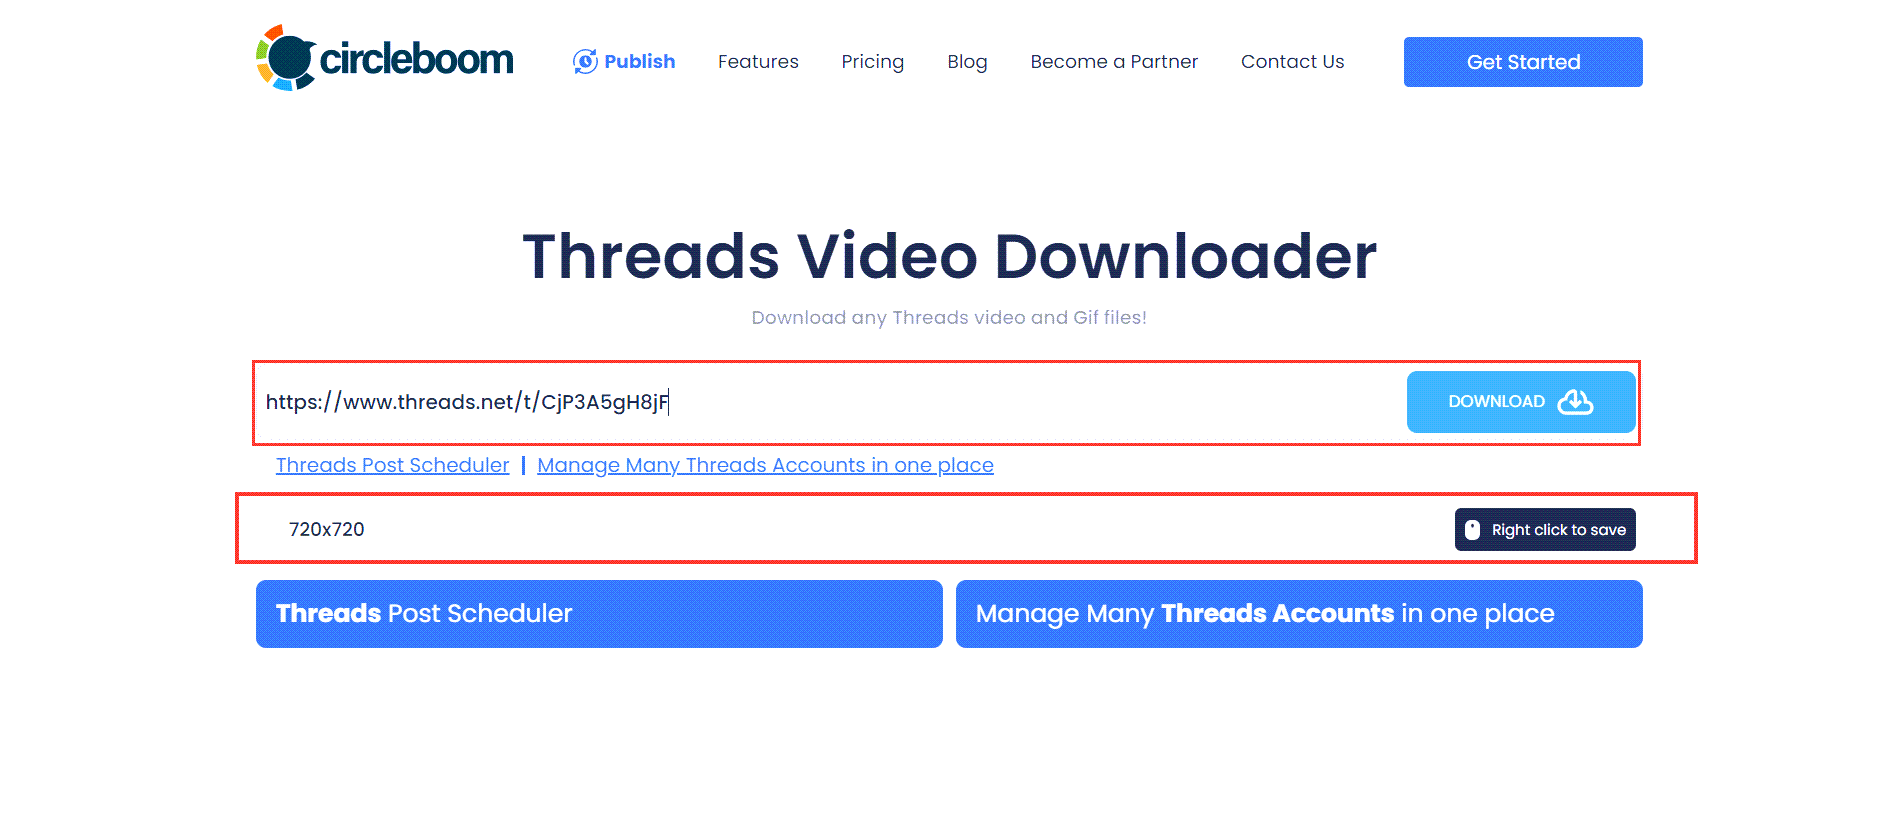 How to download videos and GIFs on Threads